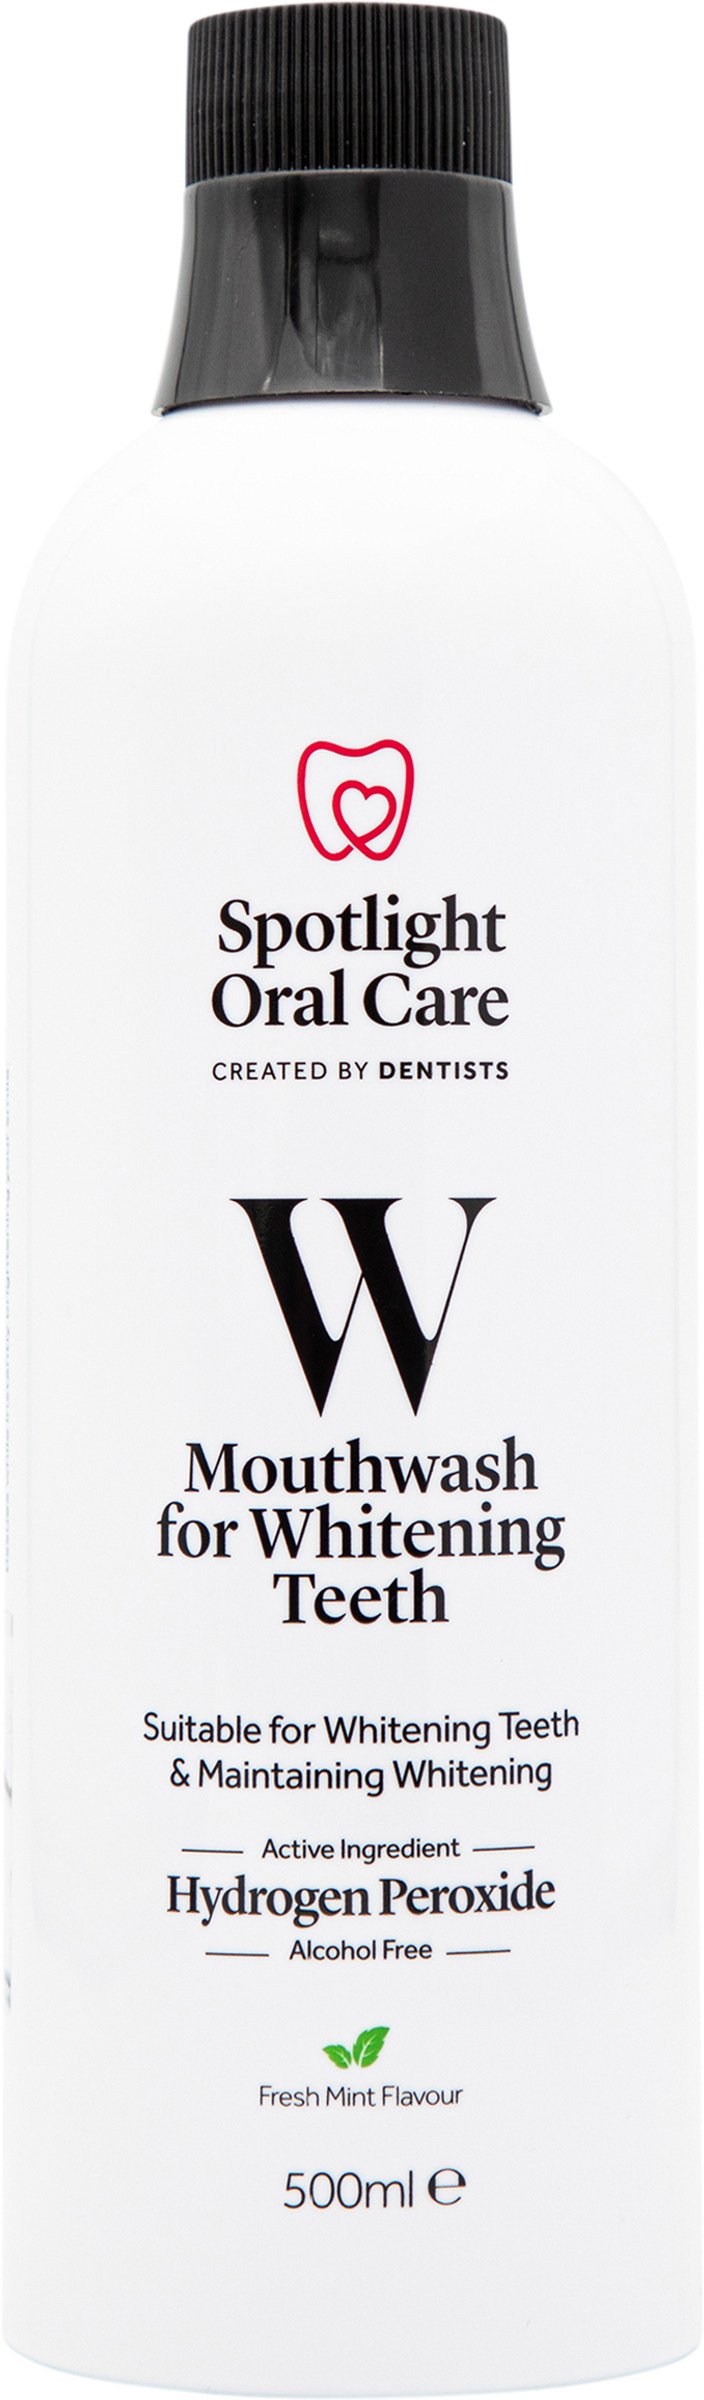 Spotlight Oral Care Mouthwash for Whitening Teeth 500 ml